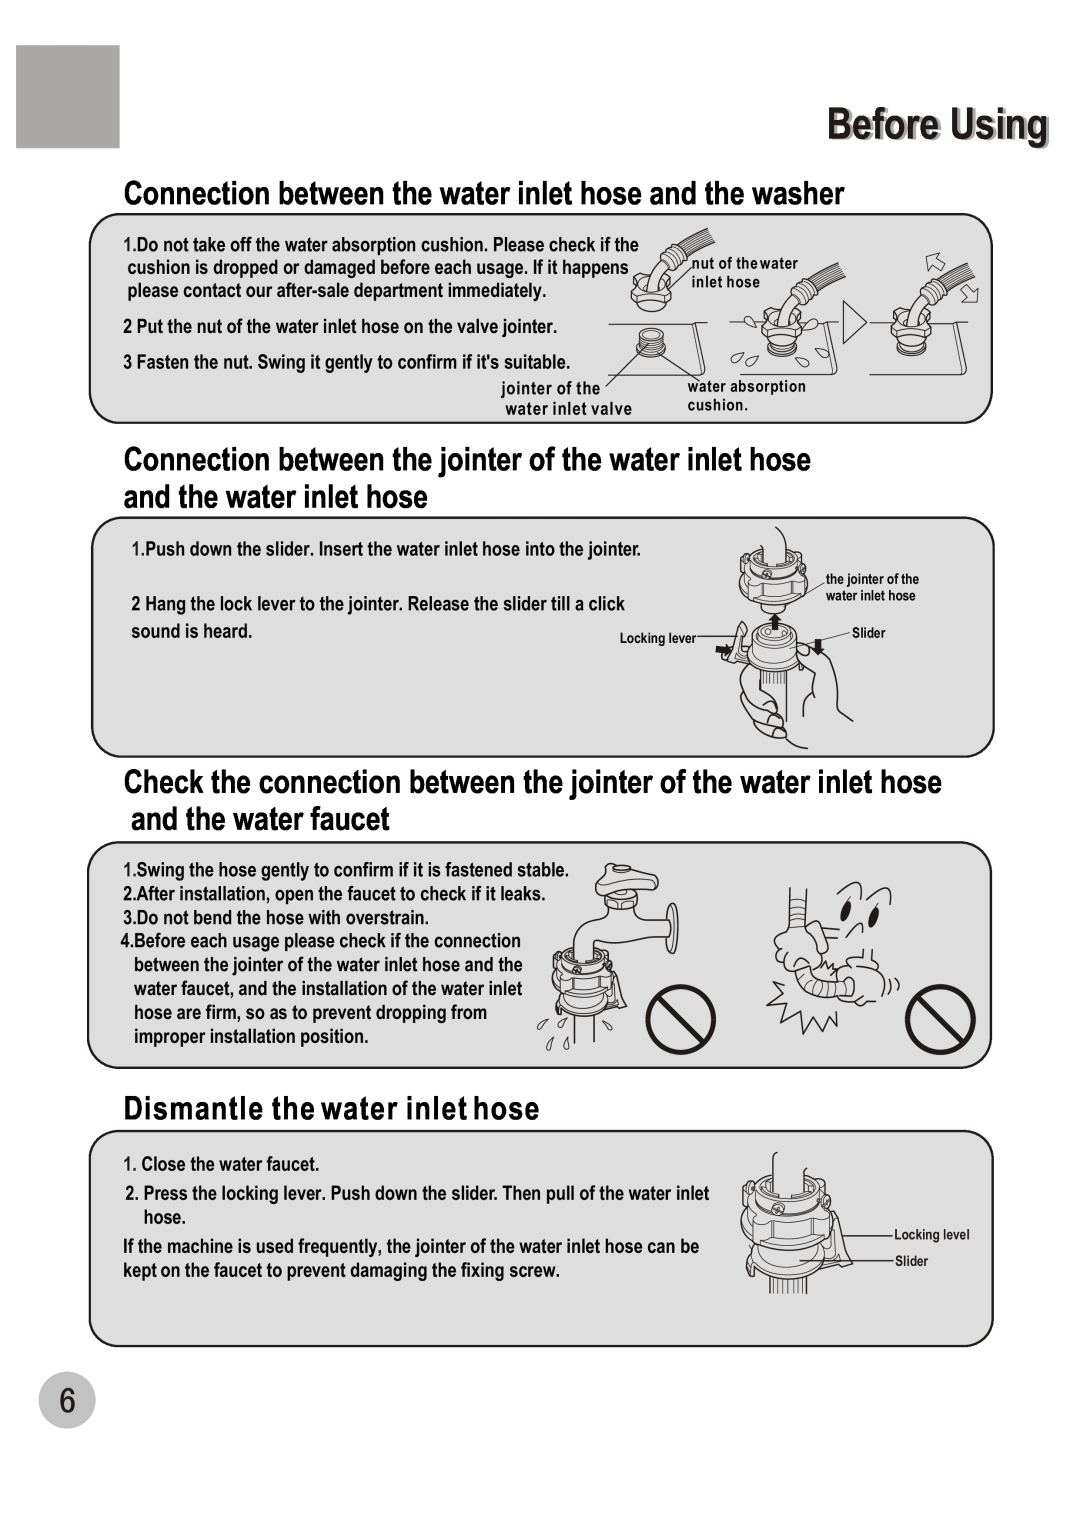 Haier WM6002A user manual Dismantle the water inlet hose 